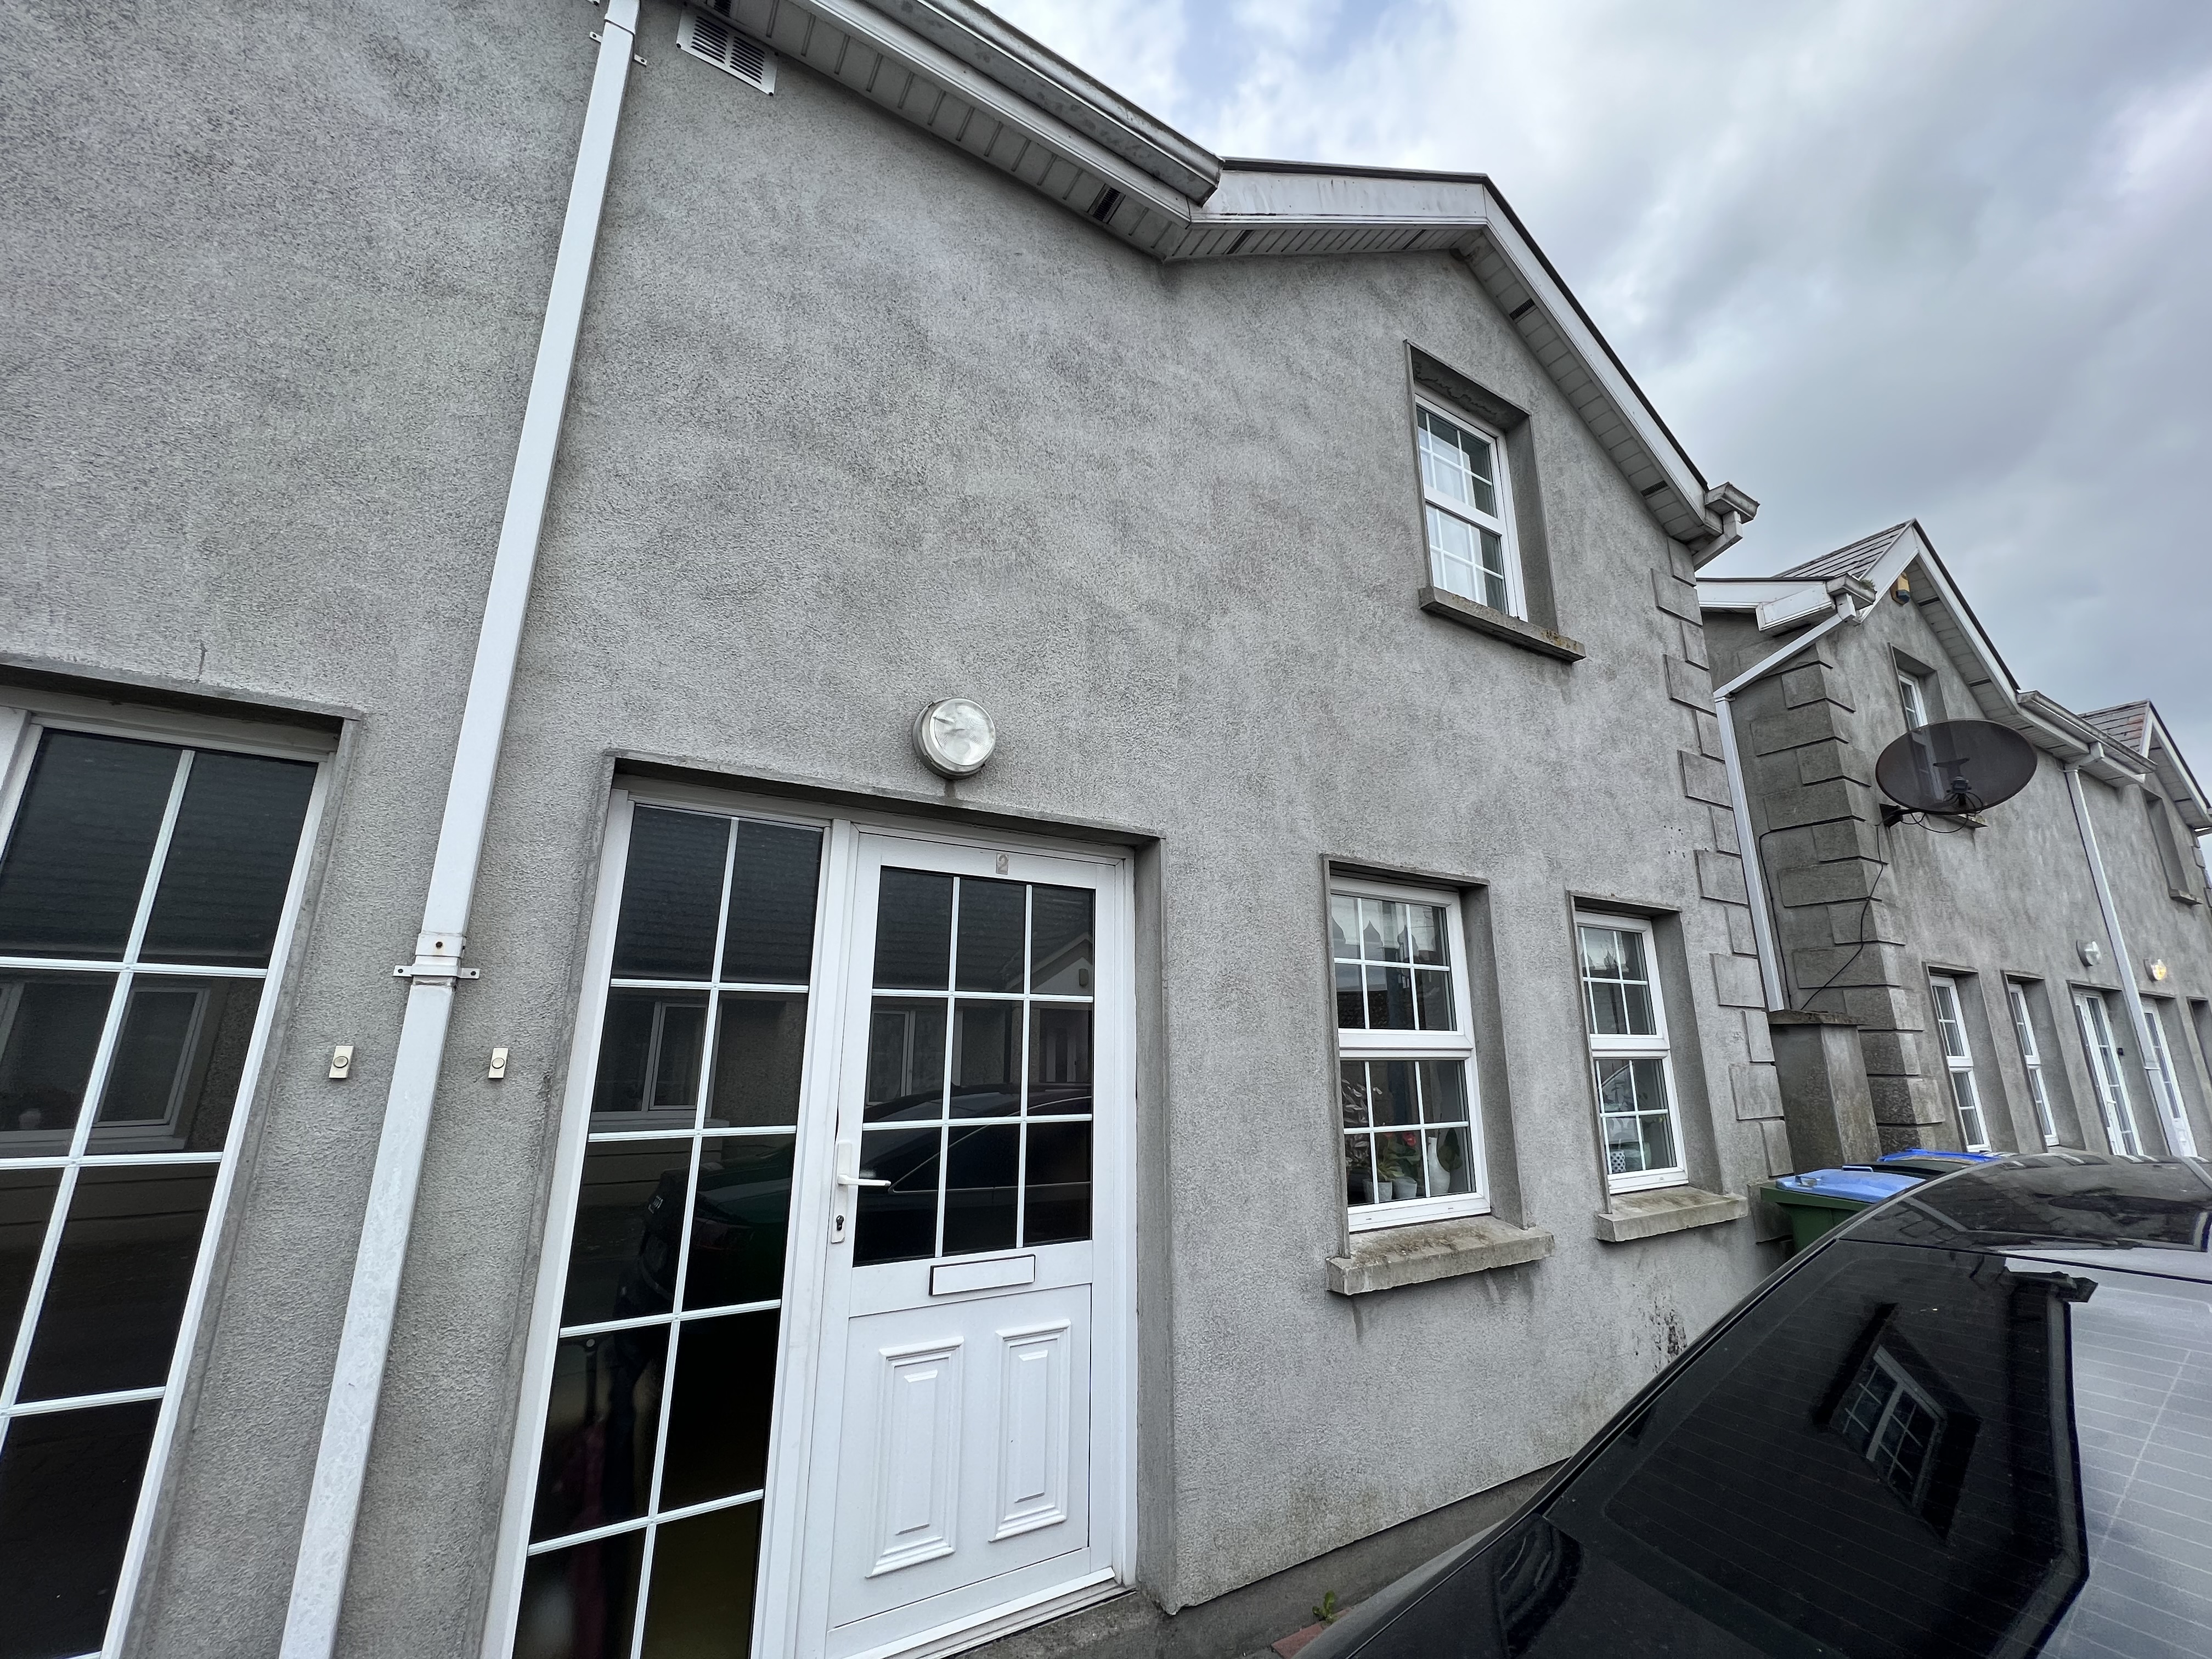 2 O Leary Close, Tipperary Town, Co. Tipperary E34 RX71